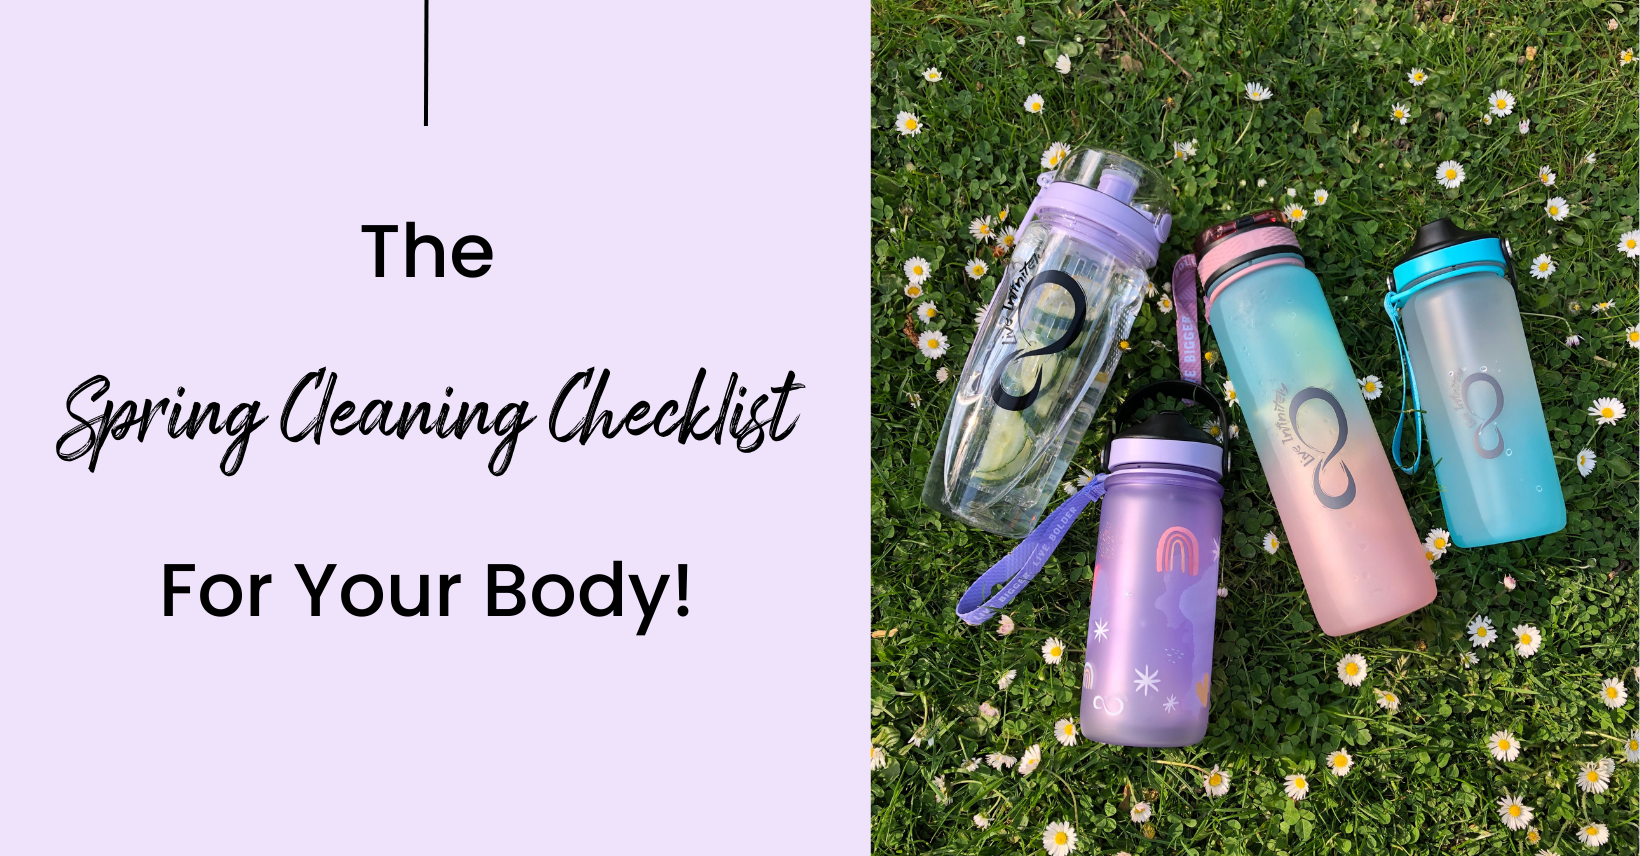 The Spring Cleaning Checklist for Your Body!